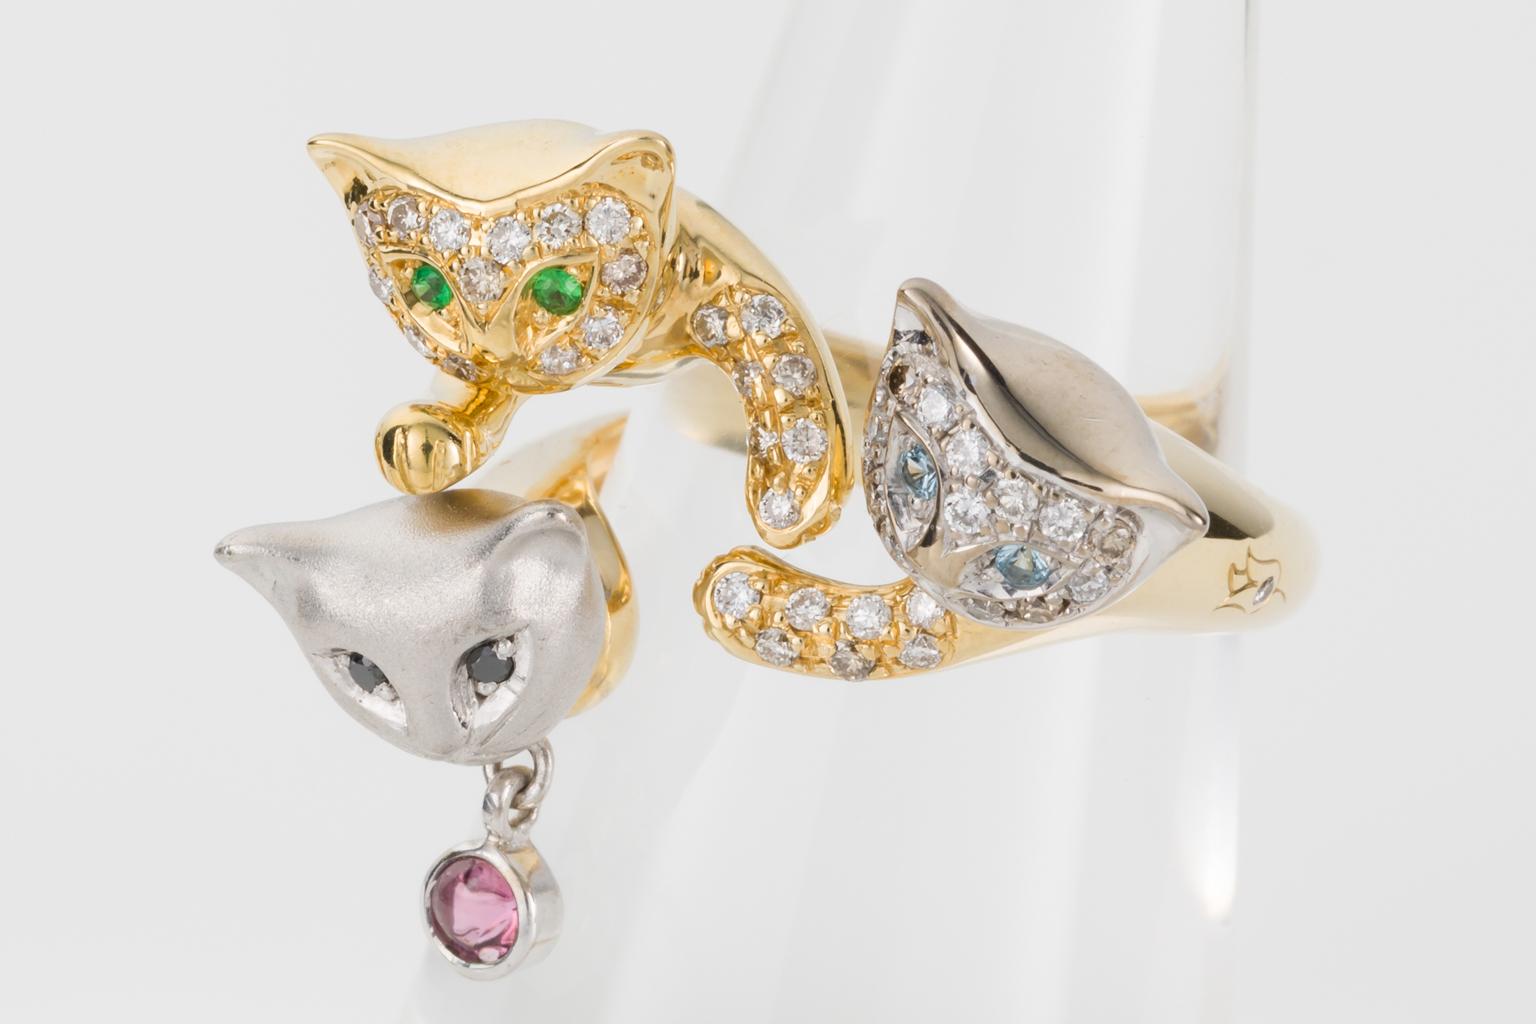 How cute is this ring? Purrrfect for a cat lover and definitely a talking point when people see this unique style.
Designed as three cats looking up, one in yellow gold with pave set diamonds and green emerald eyes,  the next is brushed 18k white